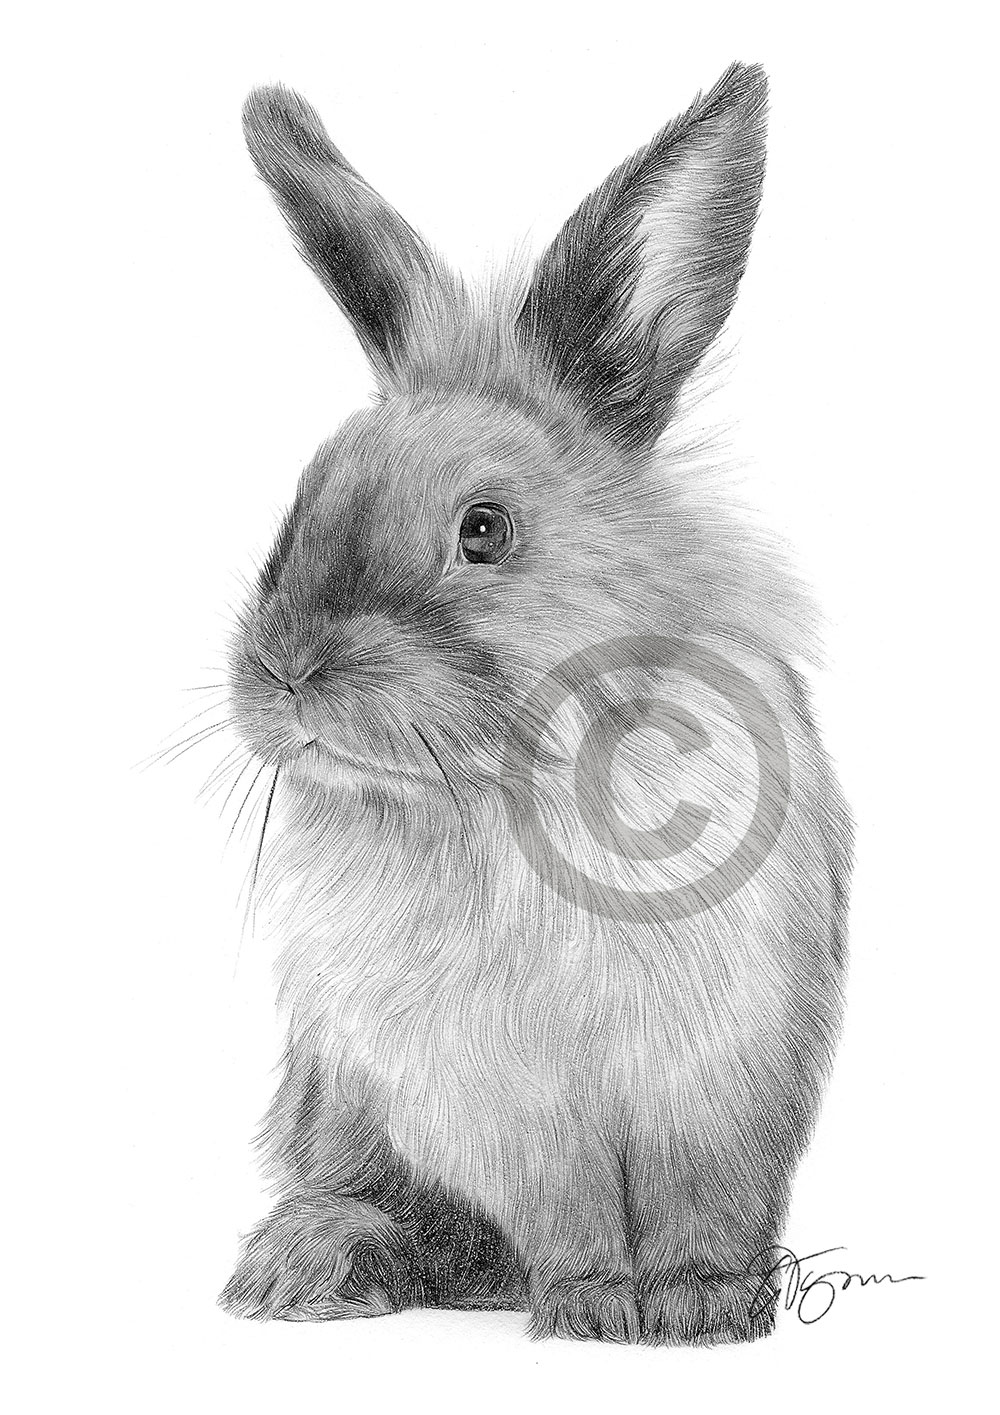 Creative Sketch Rabbit Drawing Reference with Realistic